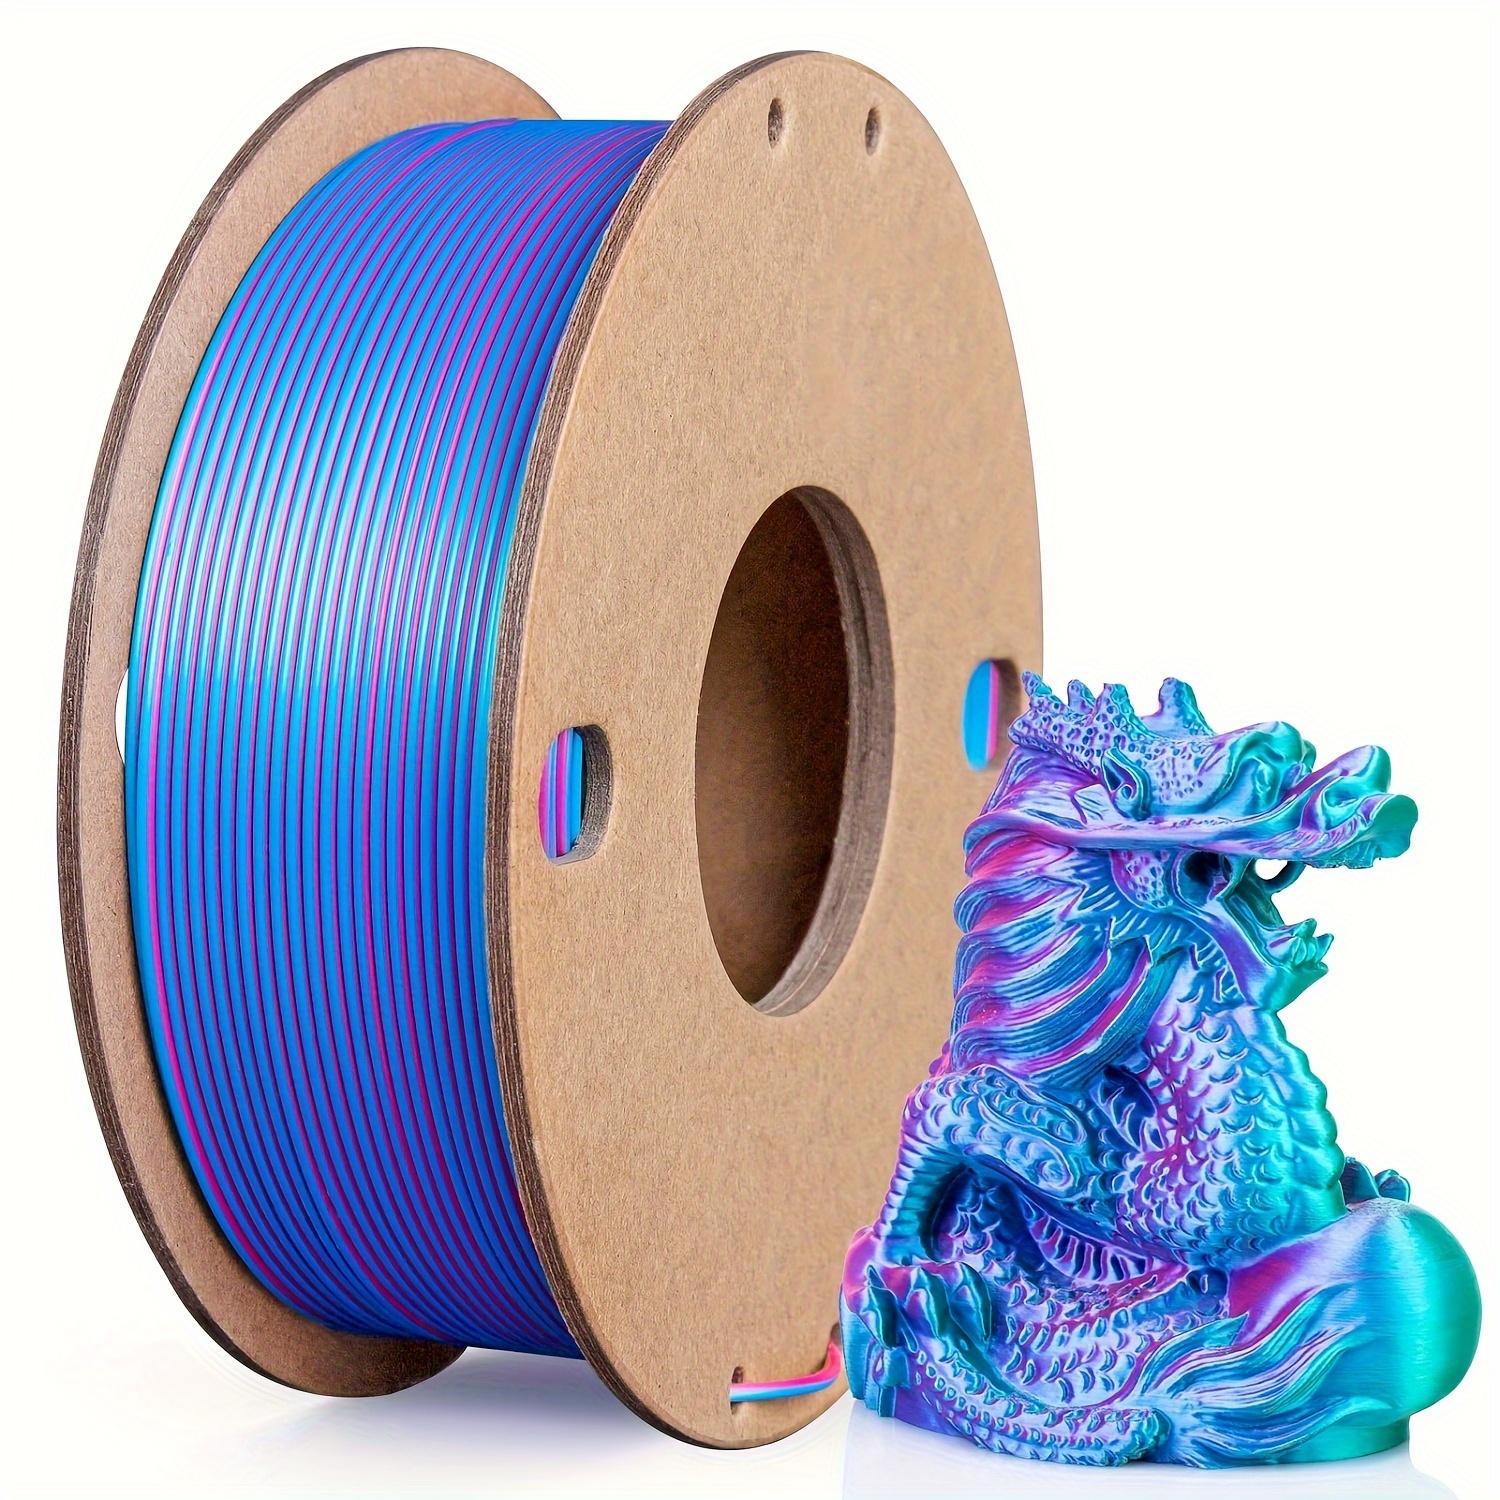 The Best Silk PLA Filaments in 2024